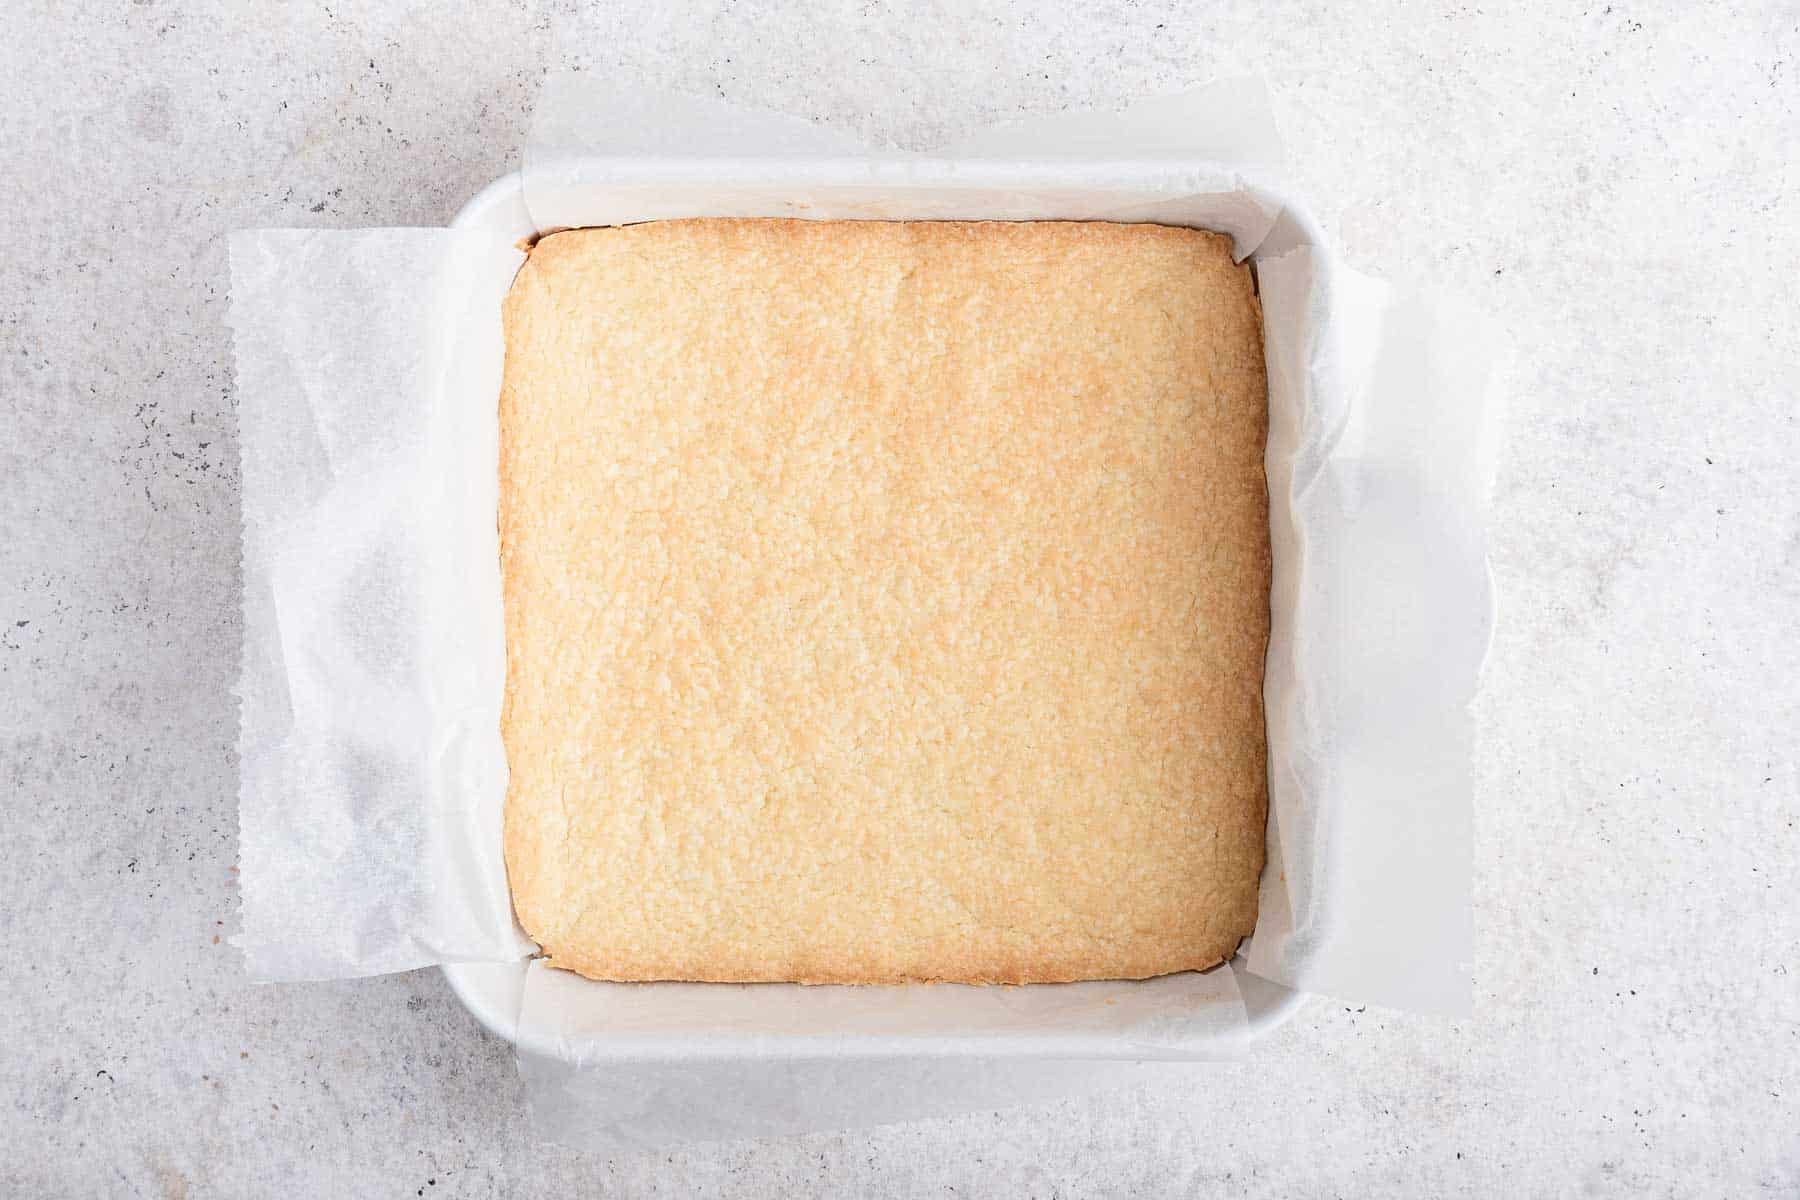 Freshly baked shortbread crust in a square white pan.